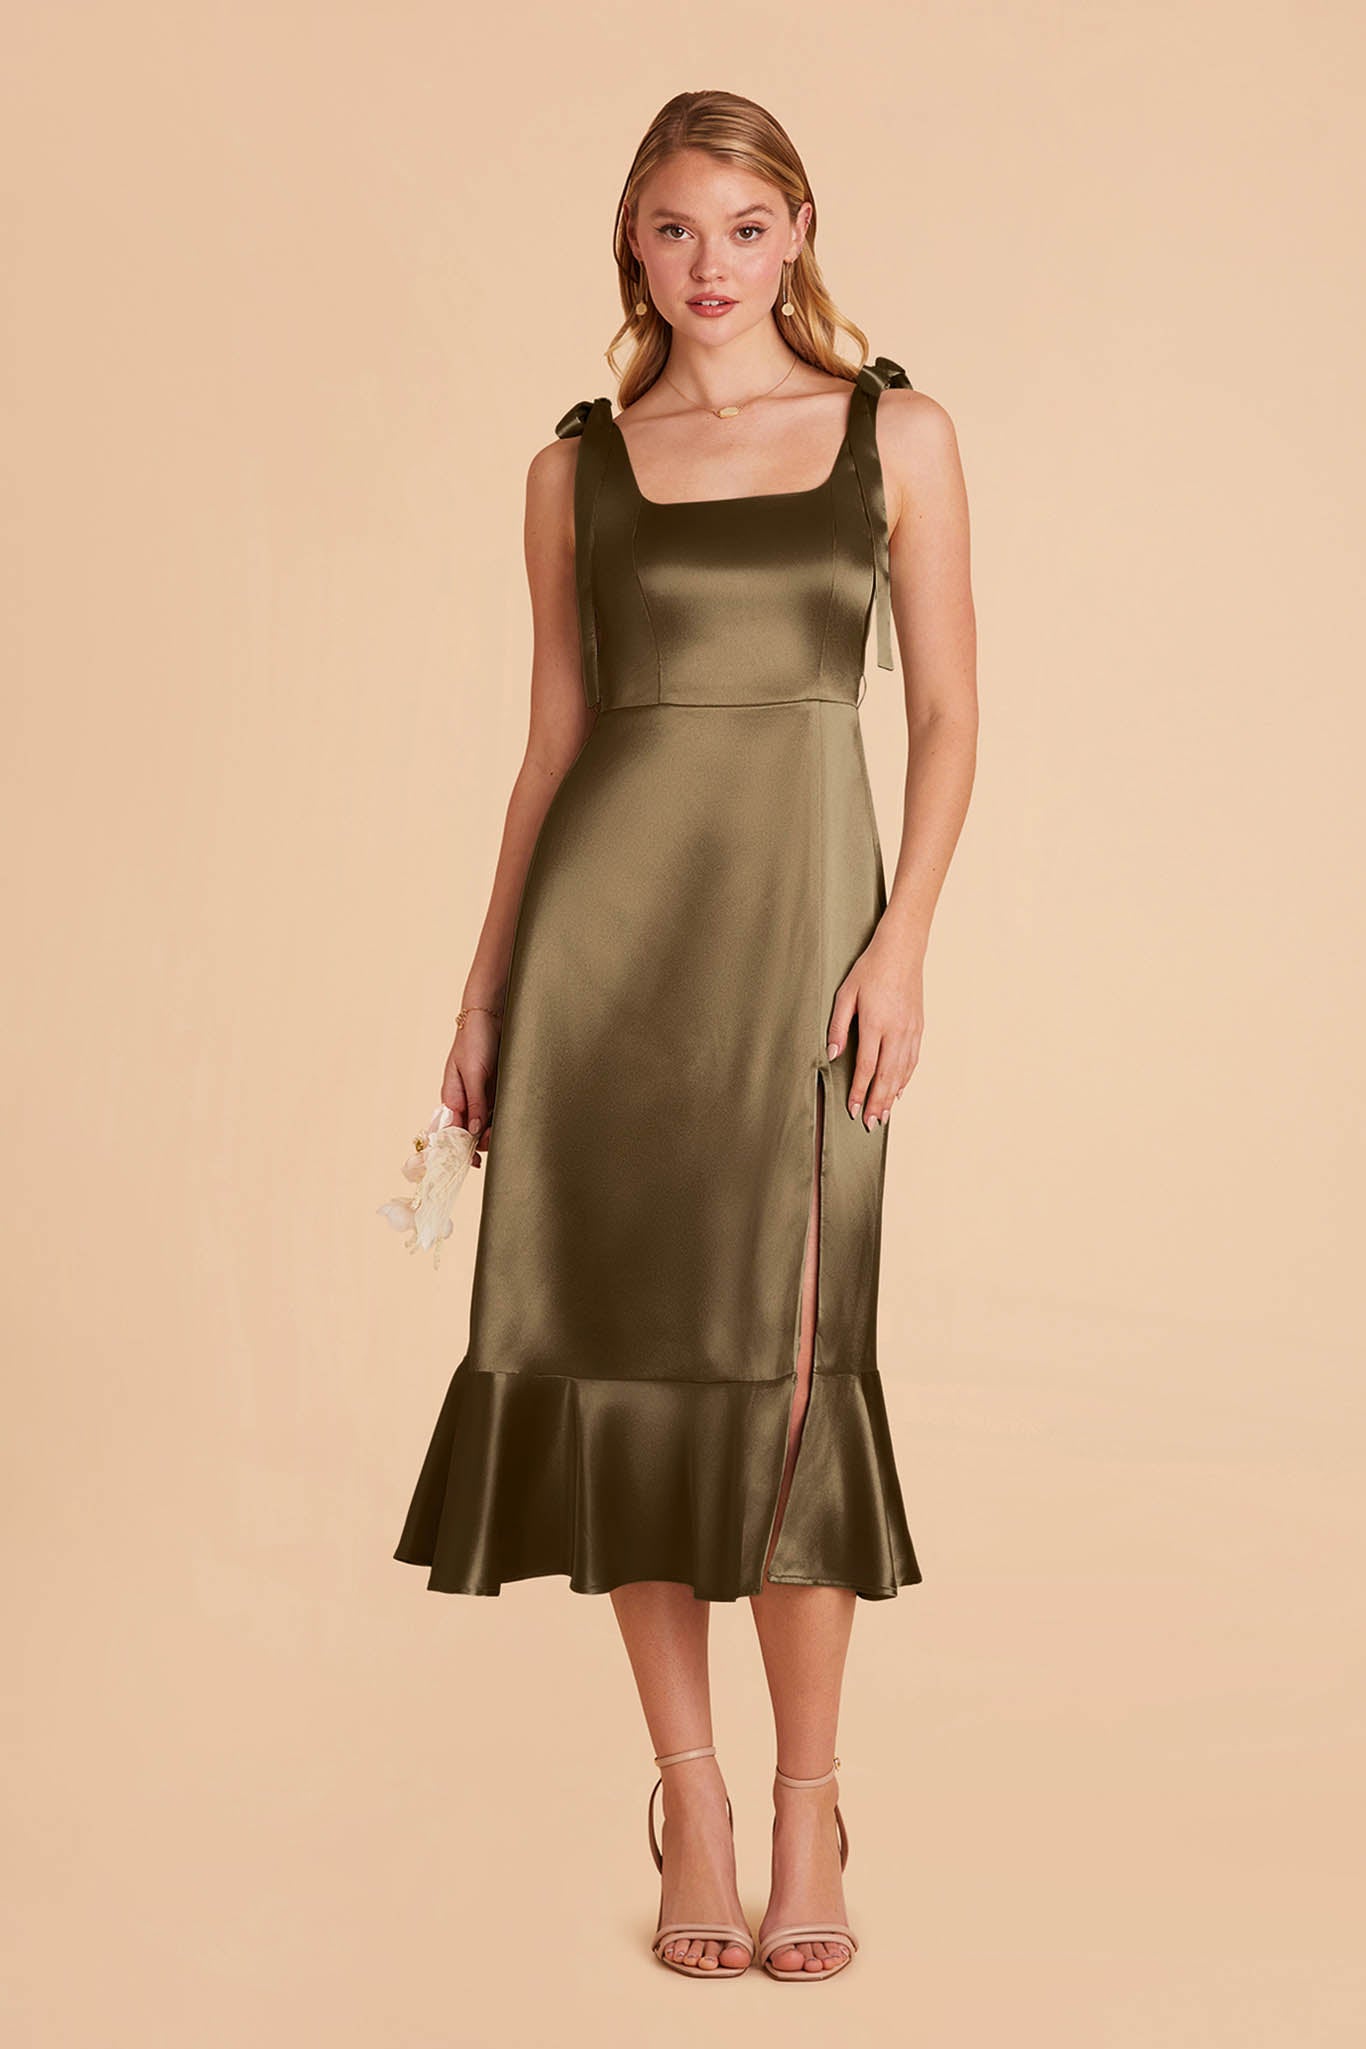 Olive Eugenia Convertible Midi Dress by Birdy Grey